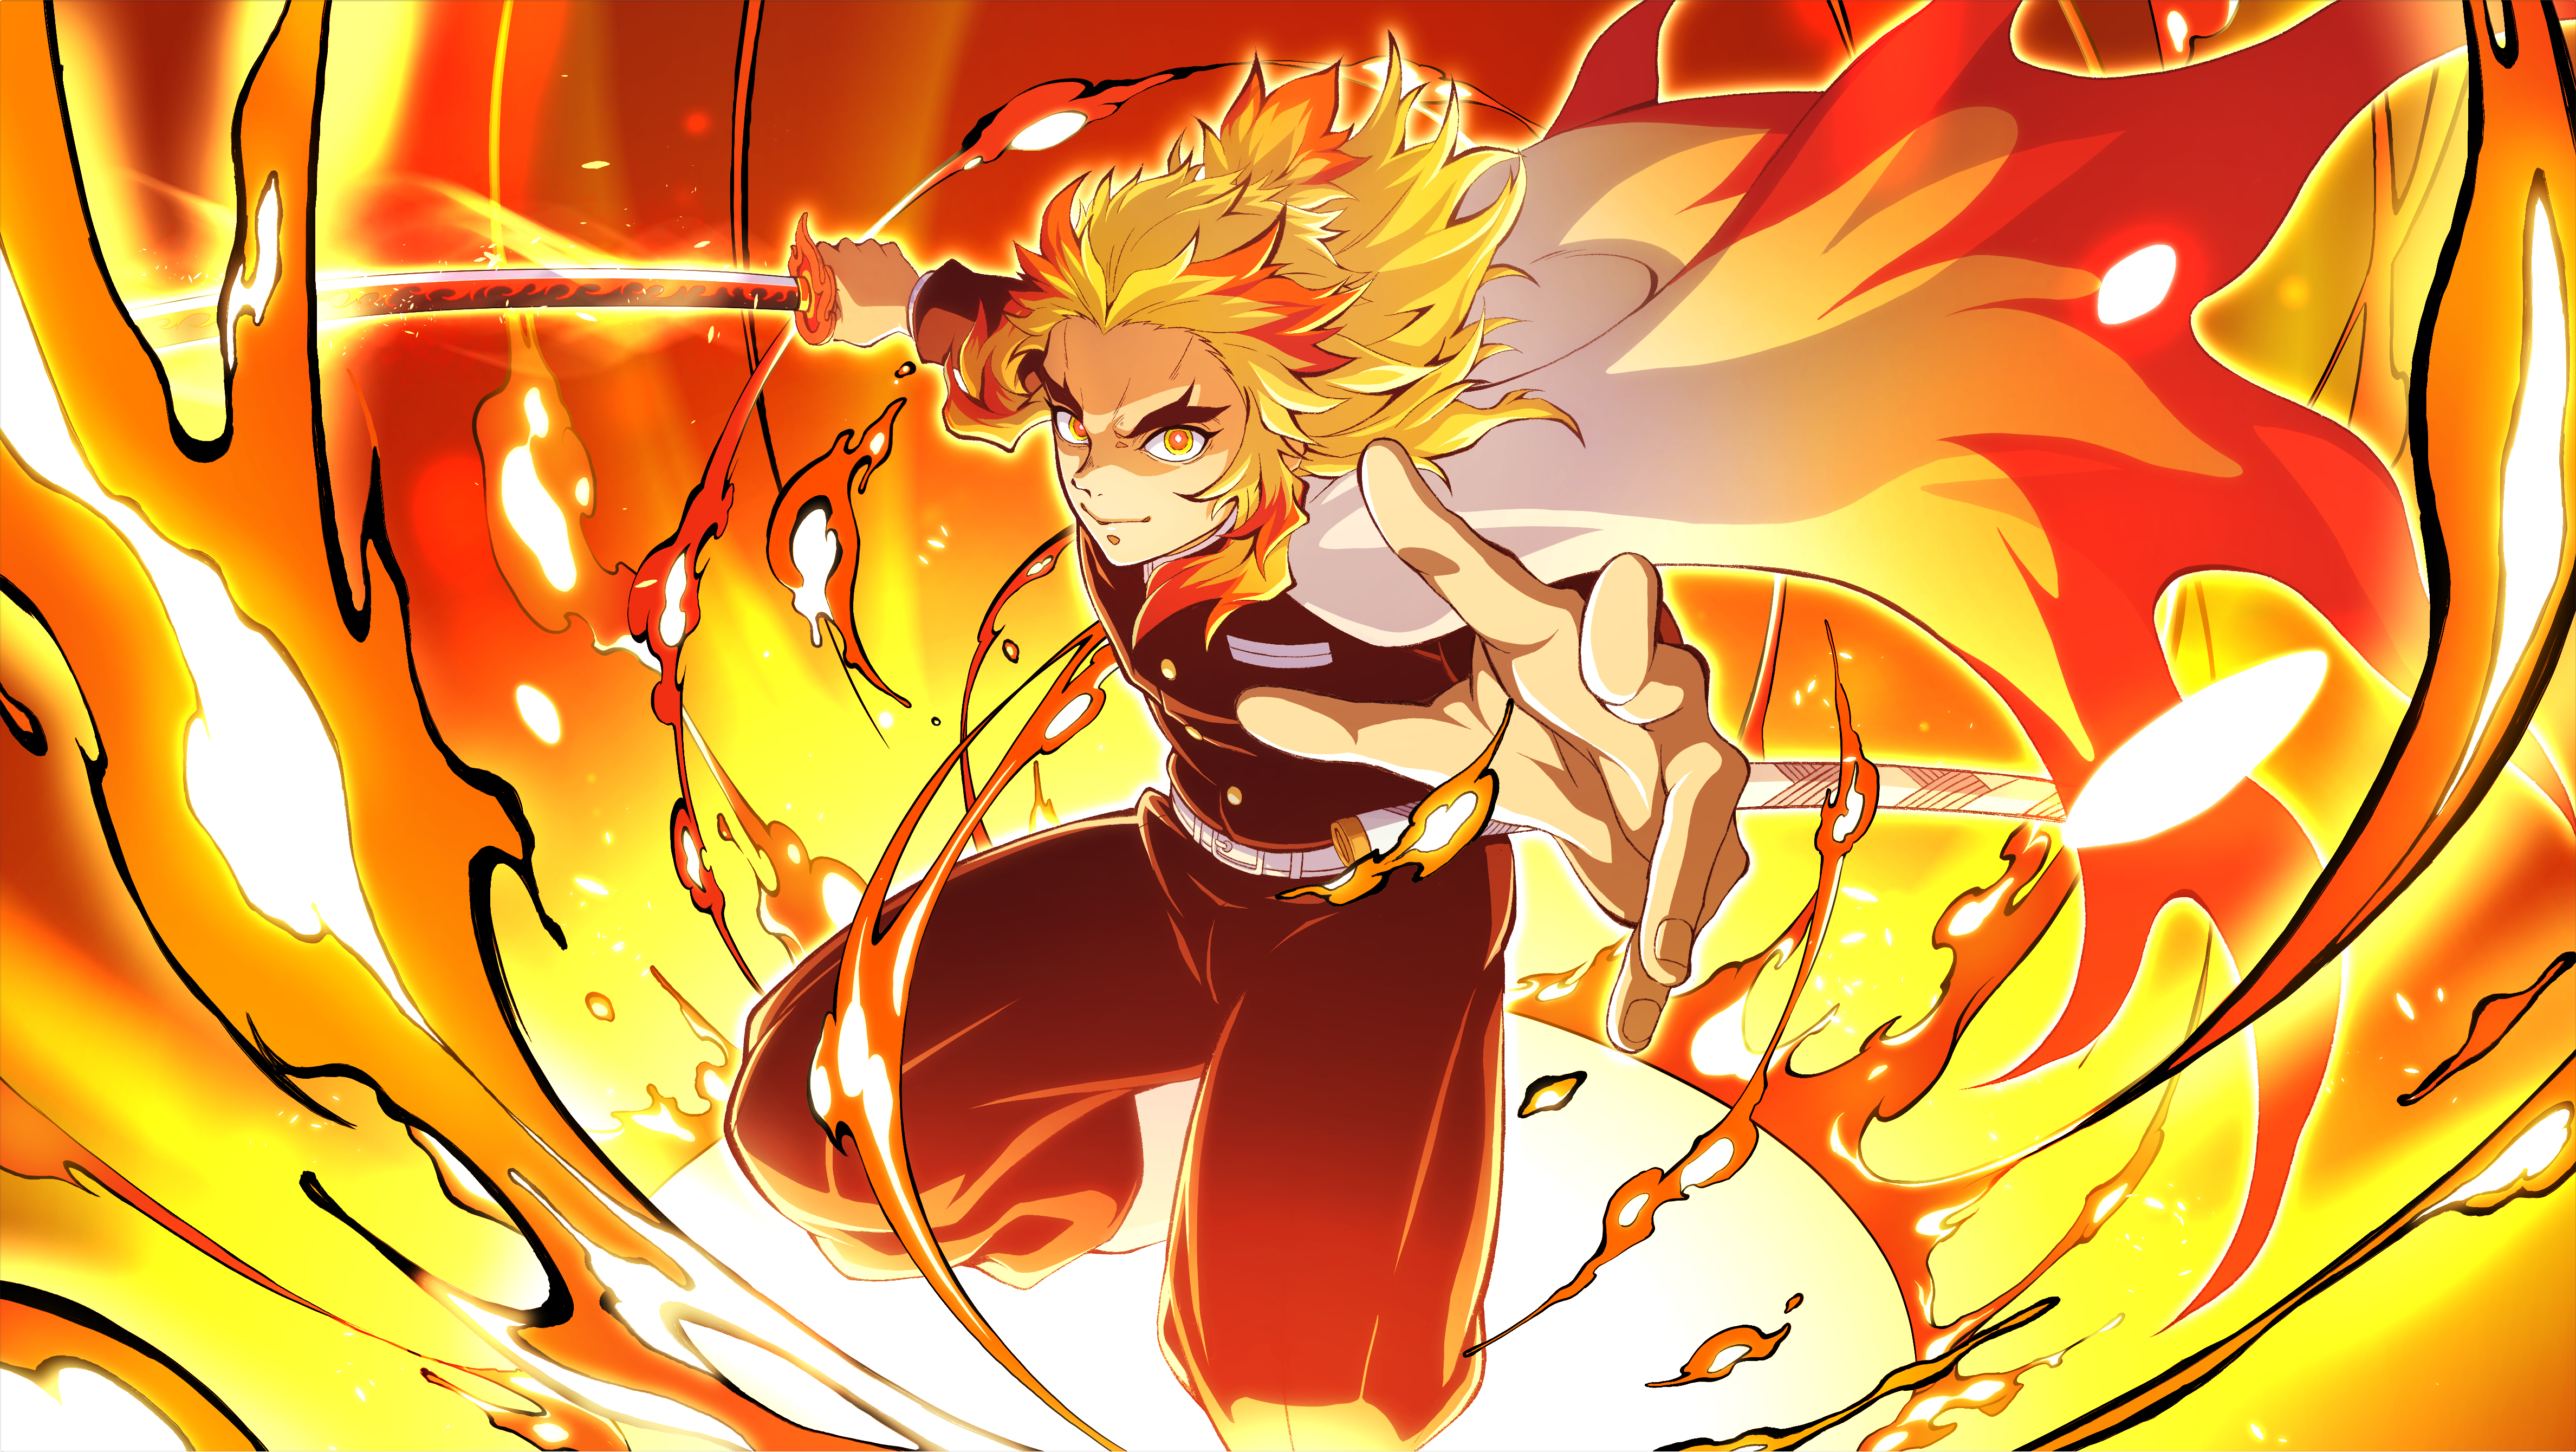 1024x768 4k Kyojuro Rengoku Ultra 1024x768 Resolution Wallpaper Hd Anime 4k Wallpapers Images Photos And Background Wallpapers Den